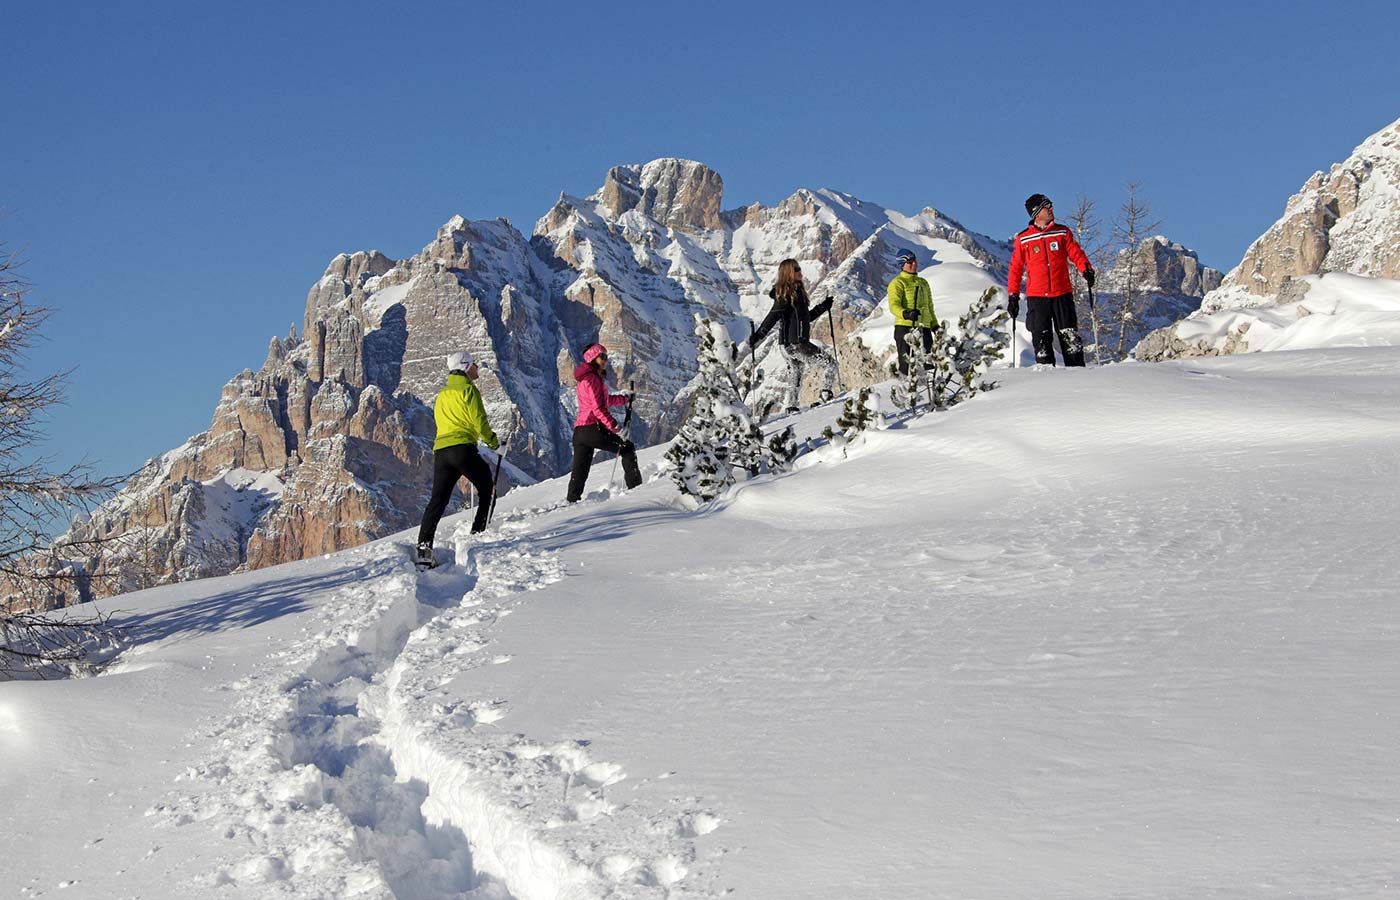 Snowshoe hiking with Dolomites at the back